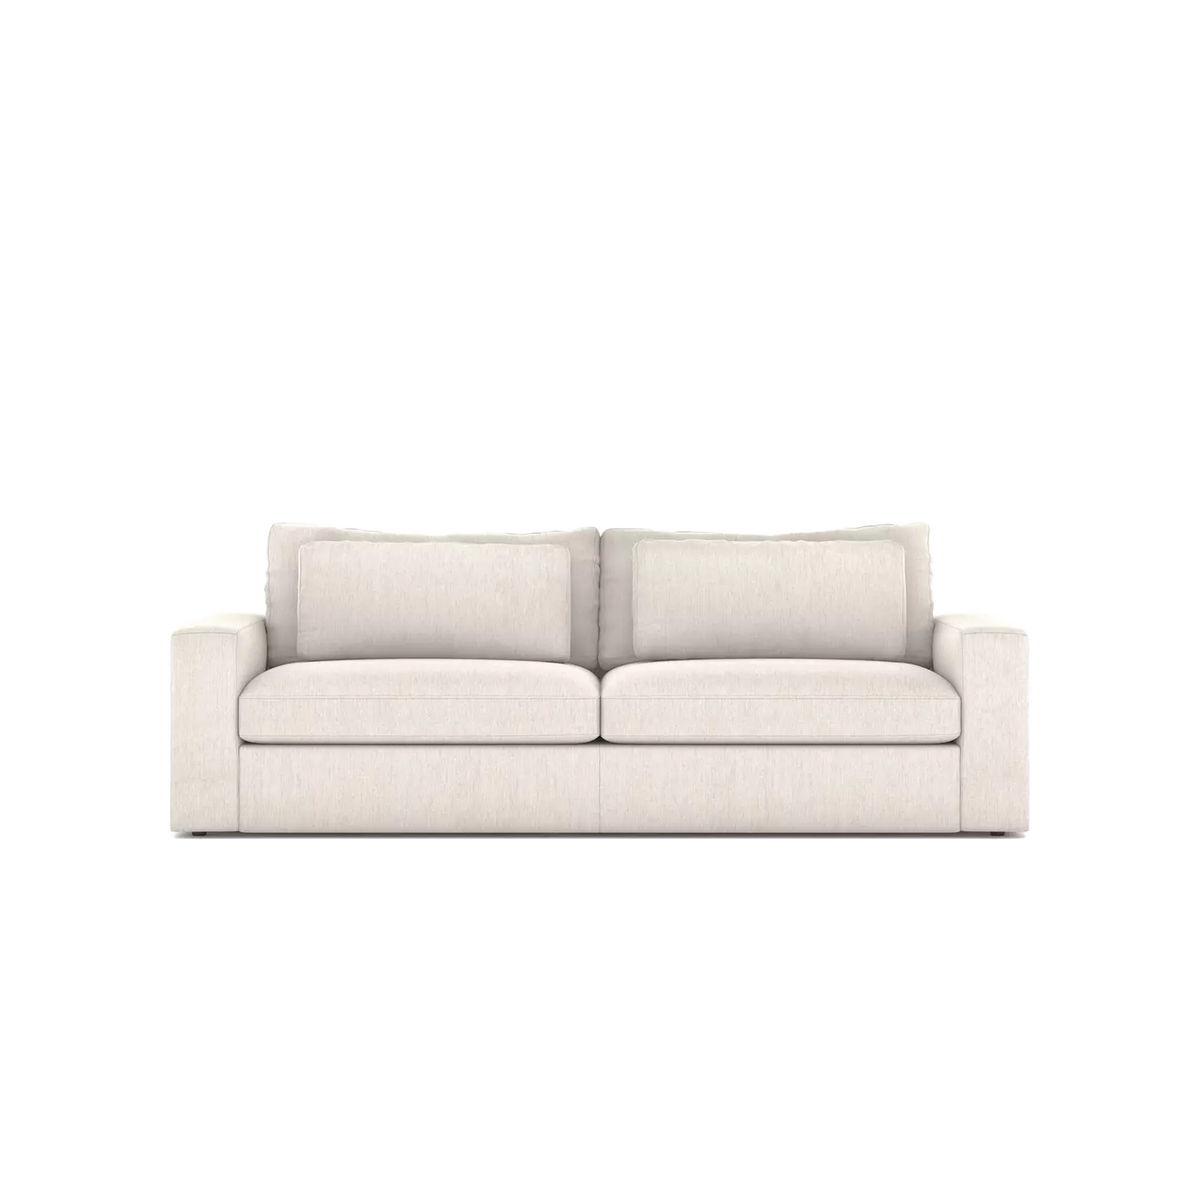 Clean-lined, current and comfortably modern, the Saxton Sleeper Sofa offers low lounge-like versatility.